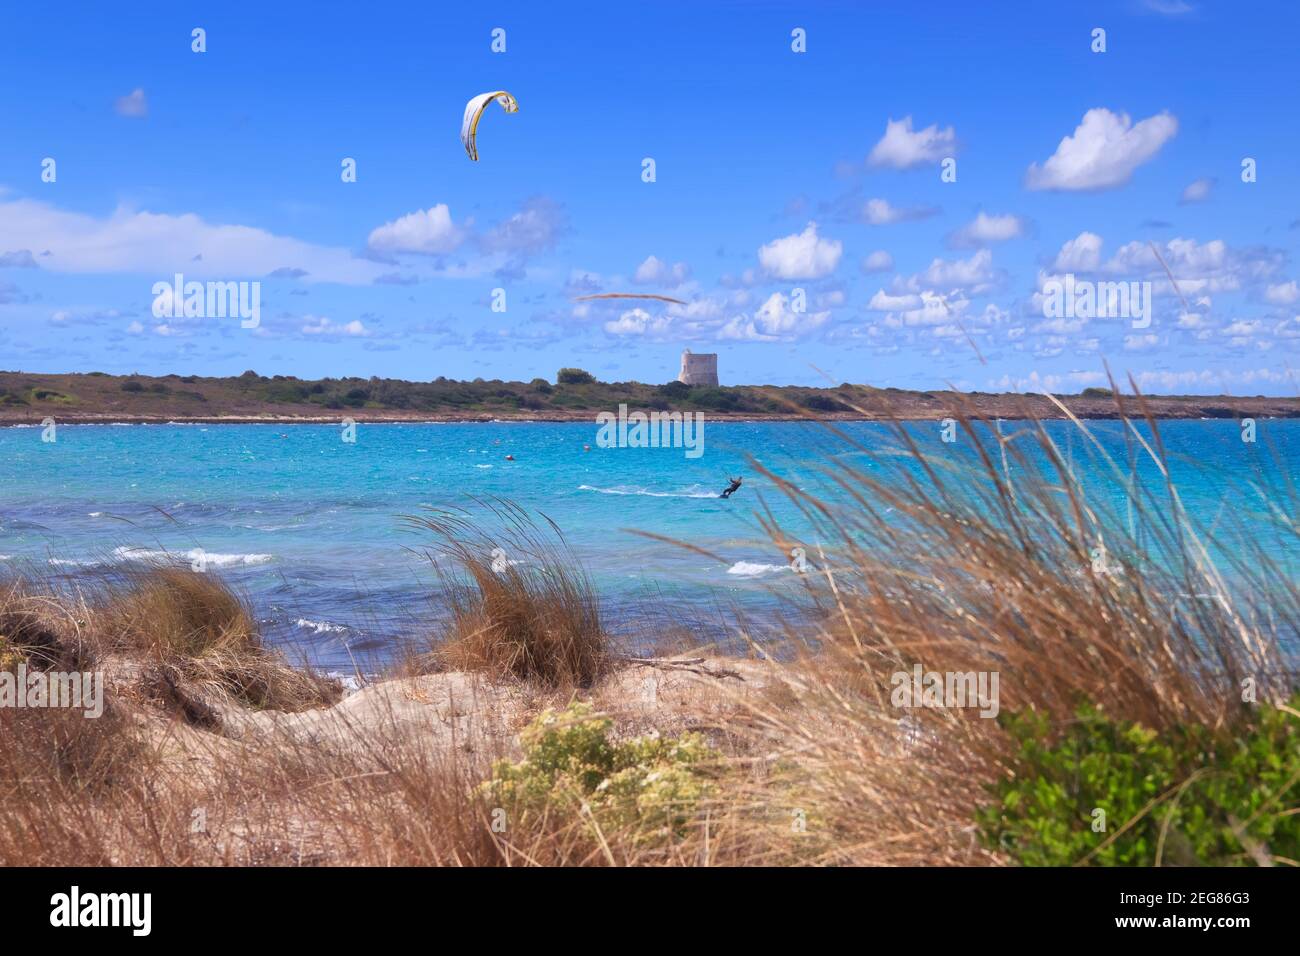 Summertime: Punta Pizzo Beach stands out in the heart of Regional Nature Park “Isola di Sant’Andrea - Litorale di Punta Pizzo”in Salento, Italy. Stock Photo